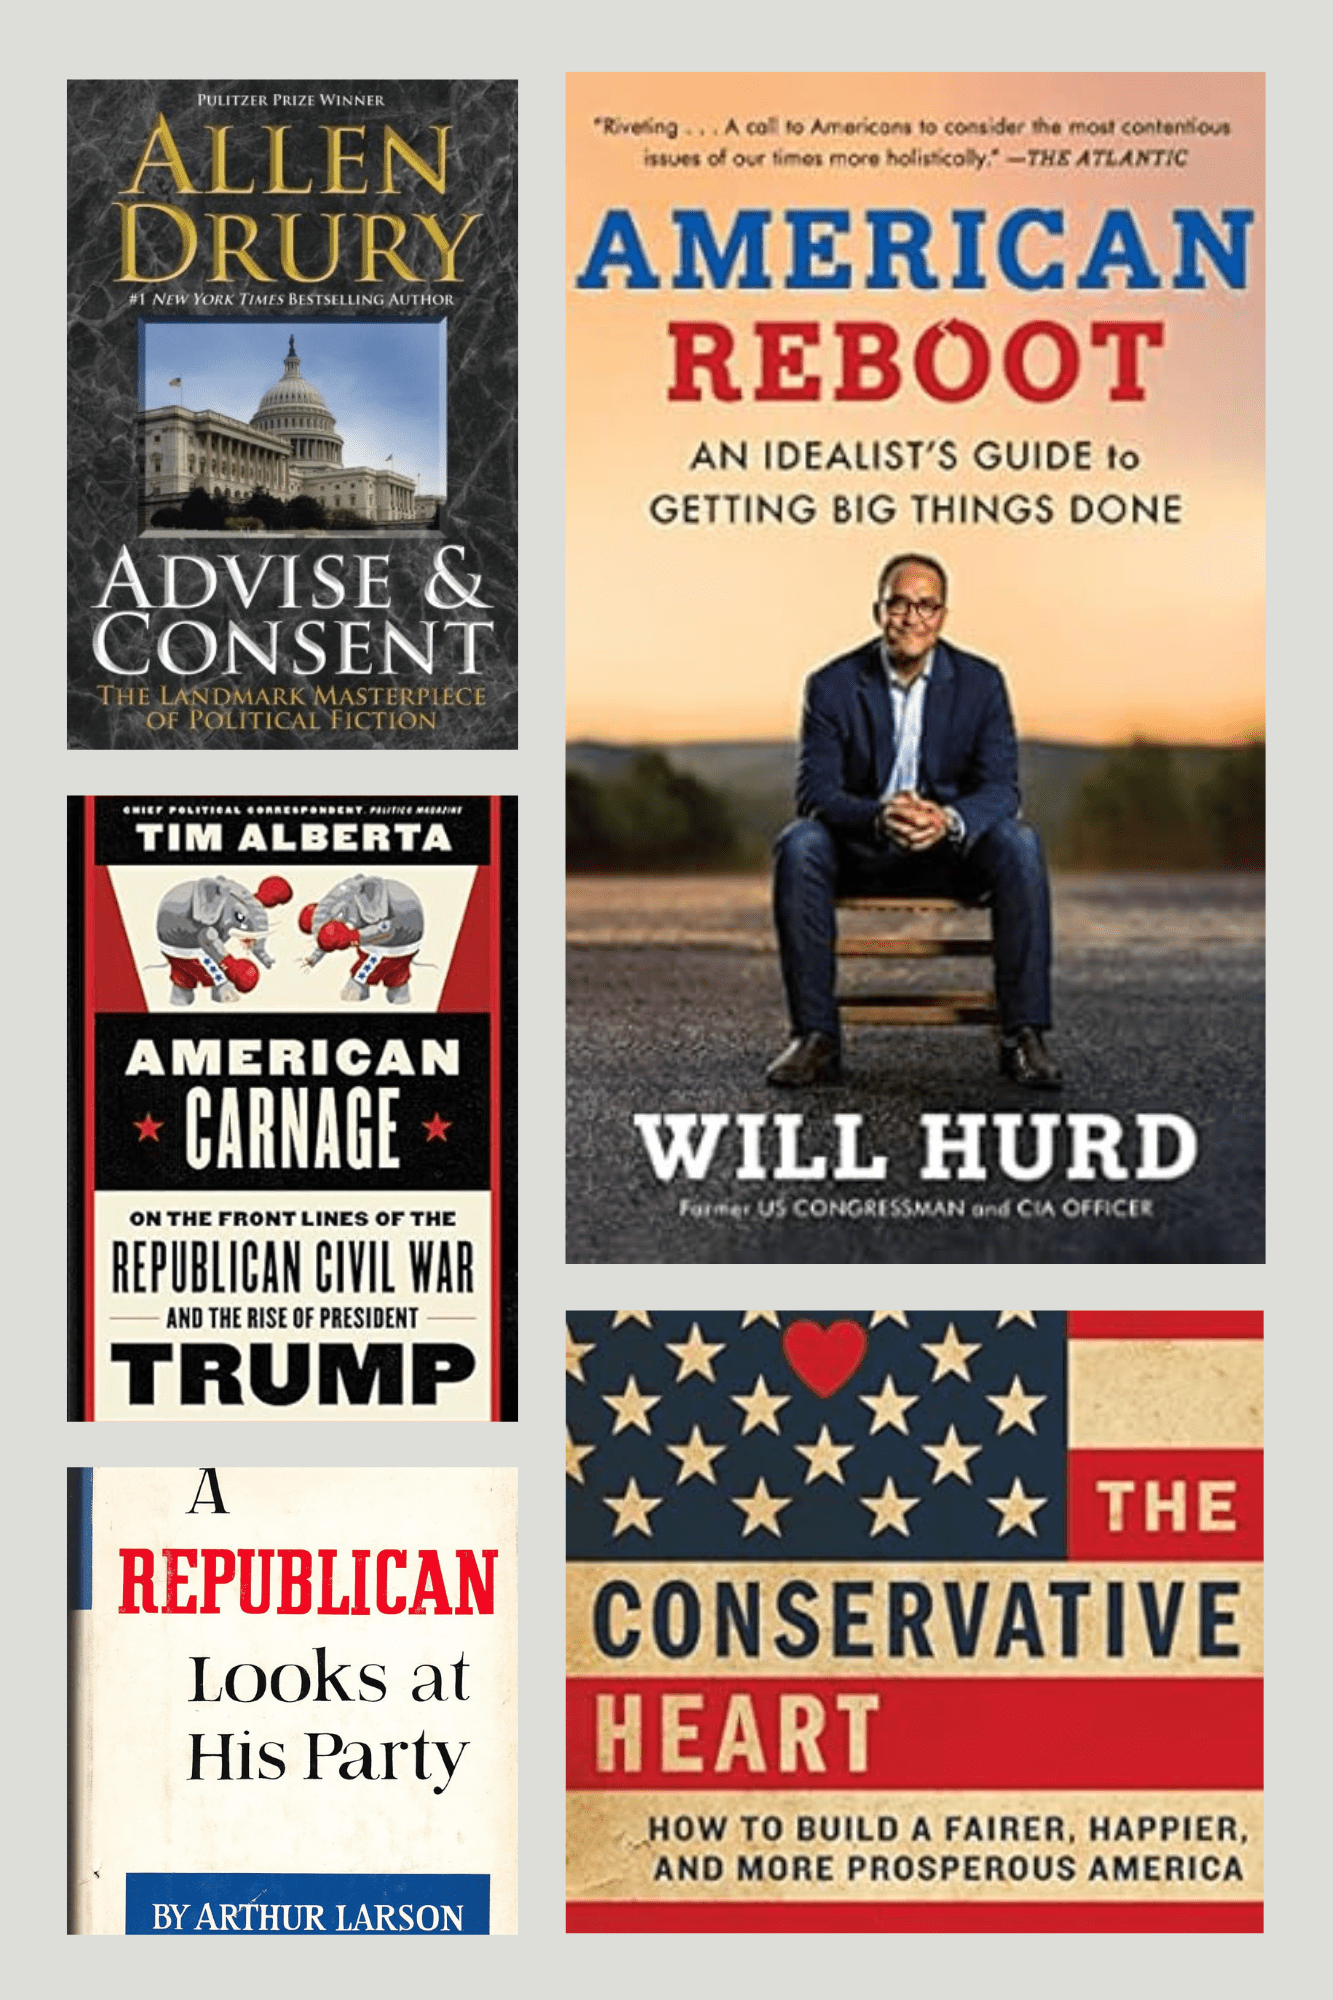 A collage of the covers of the books: Advise & Consent by Allen Drury, American Carnage by Tim Alberta, A Republican looks at his Pary by Arthur Larson, American Reboot by Will Hurd, and The Conservative Heart by Arthur Brooks